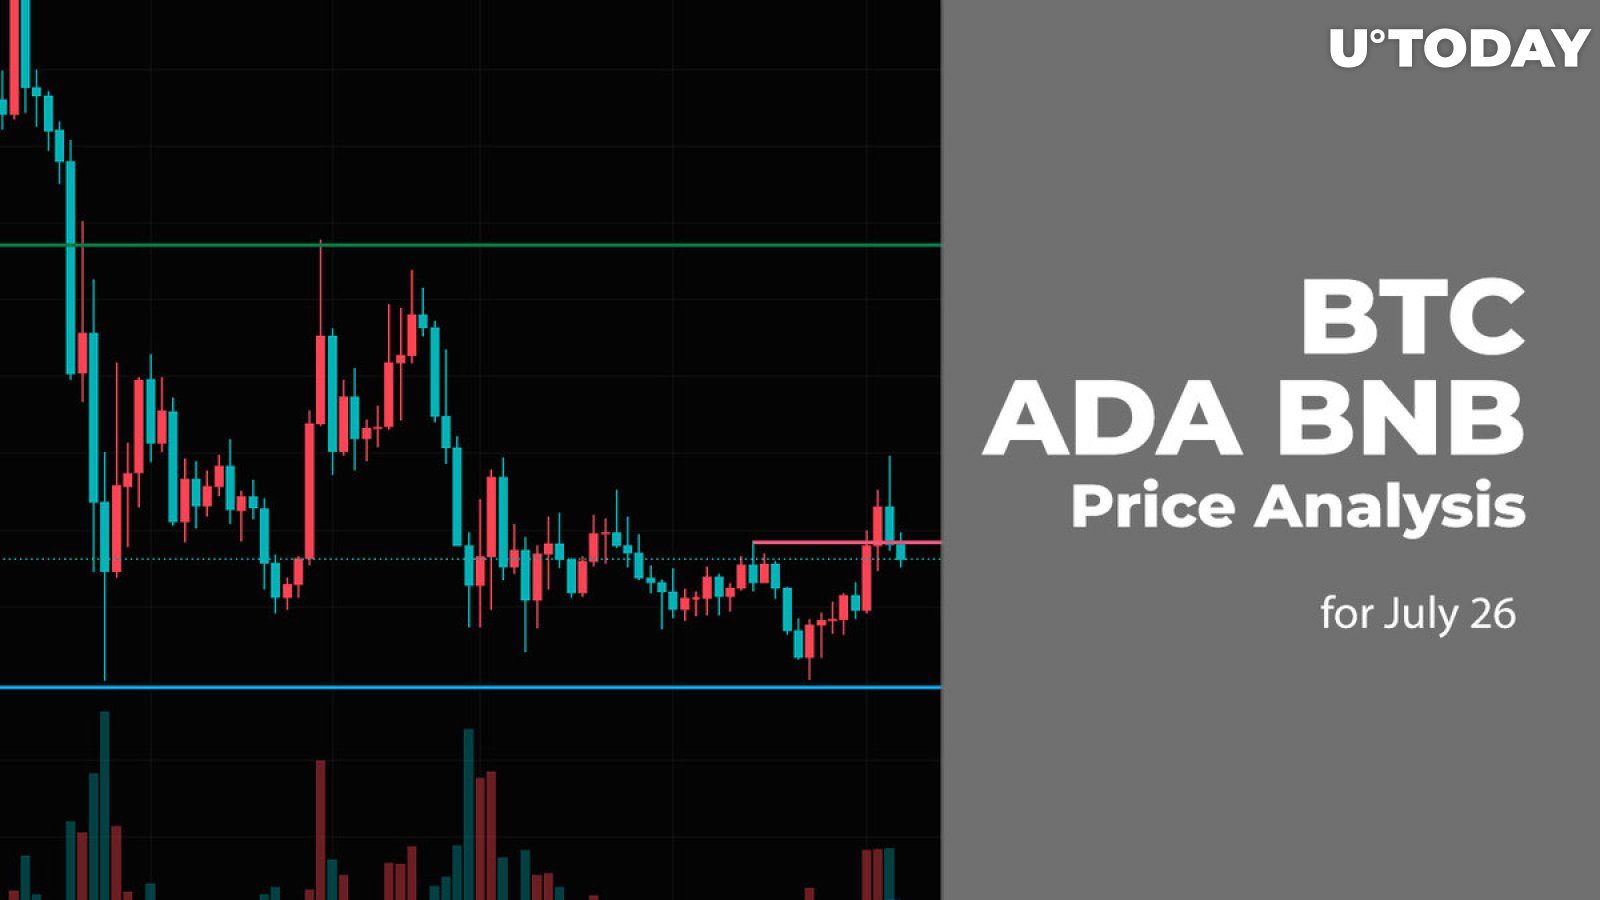 BTC, ADA and BNB Price Analysis for July 26